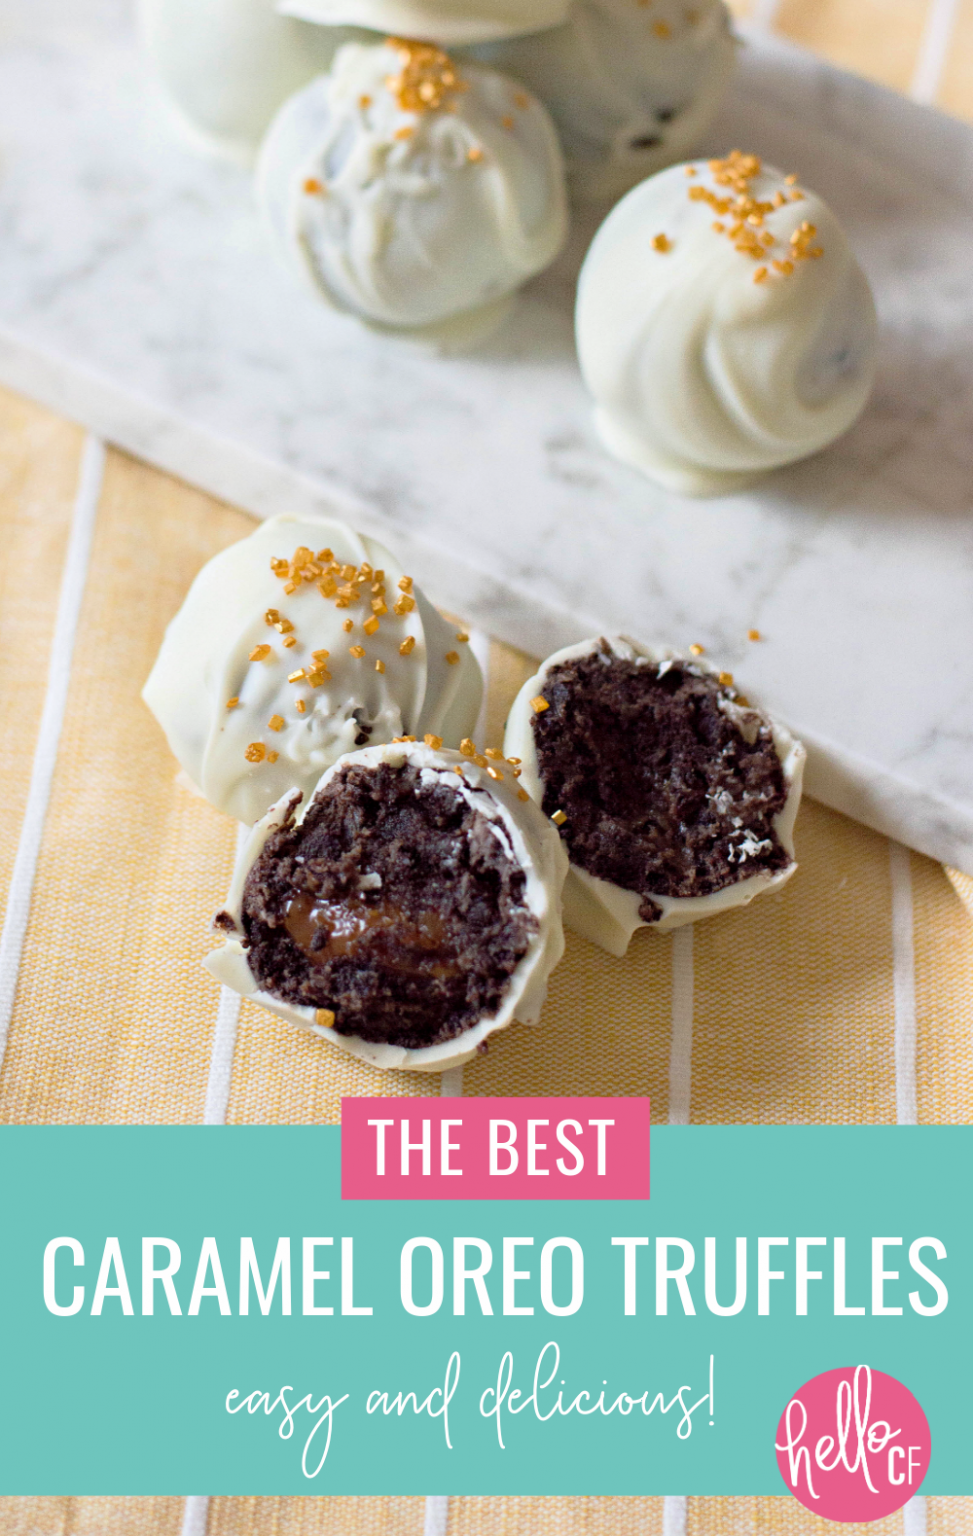 The Best Caramel Oreo Truffles Recipe- Easy and Delicious